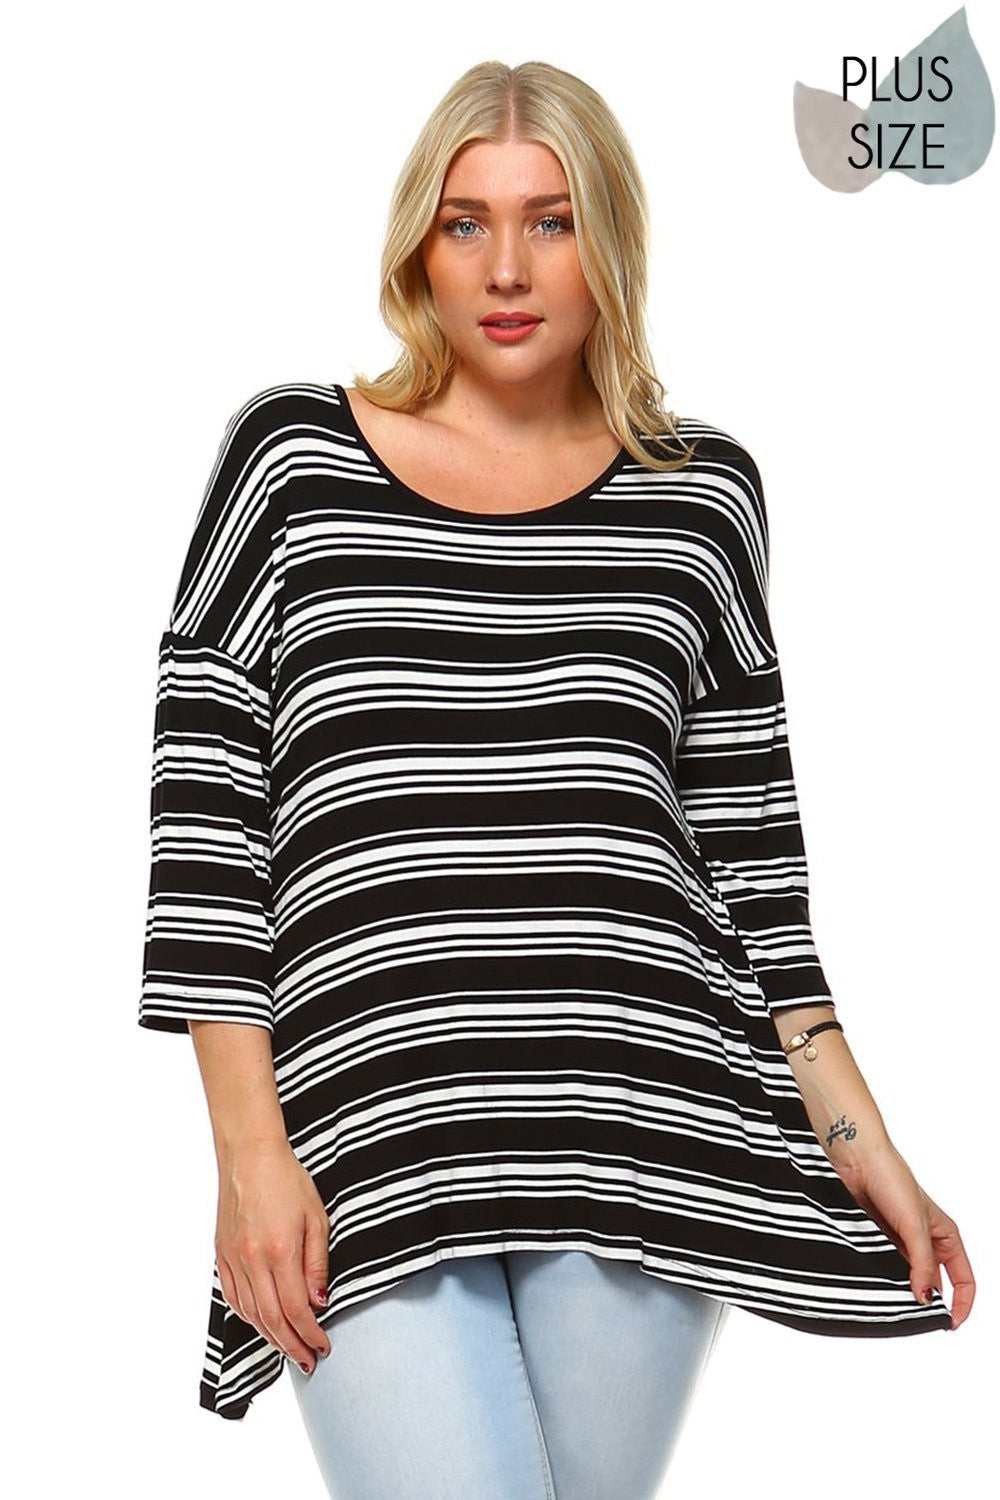 Beautiful woman wearing an Striped round neck 3/4 dropped sleeve top with asymmetrical hem. Perfect skirt for an effortless boho style, pair with boots for fall or your favorite sandals for summer. Festivals, Beach Day, Vacation